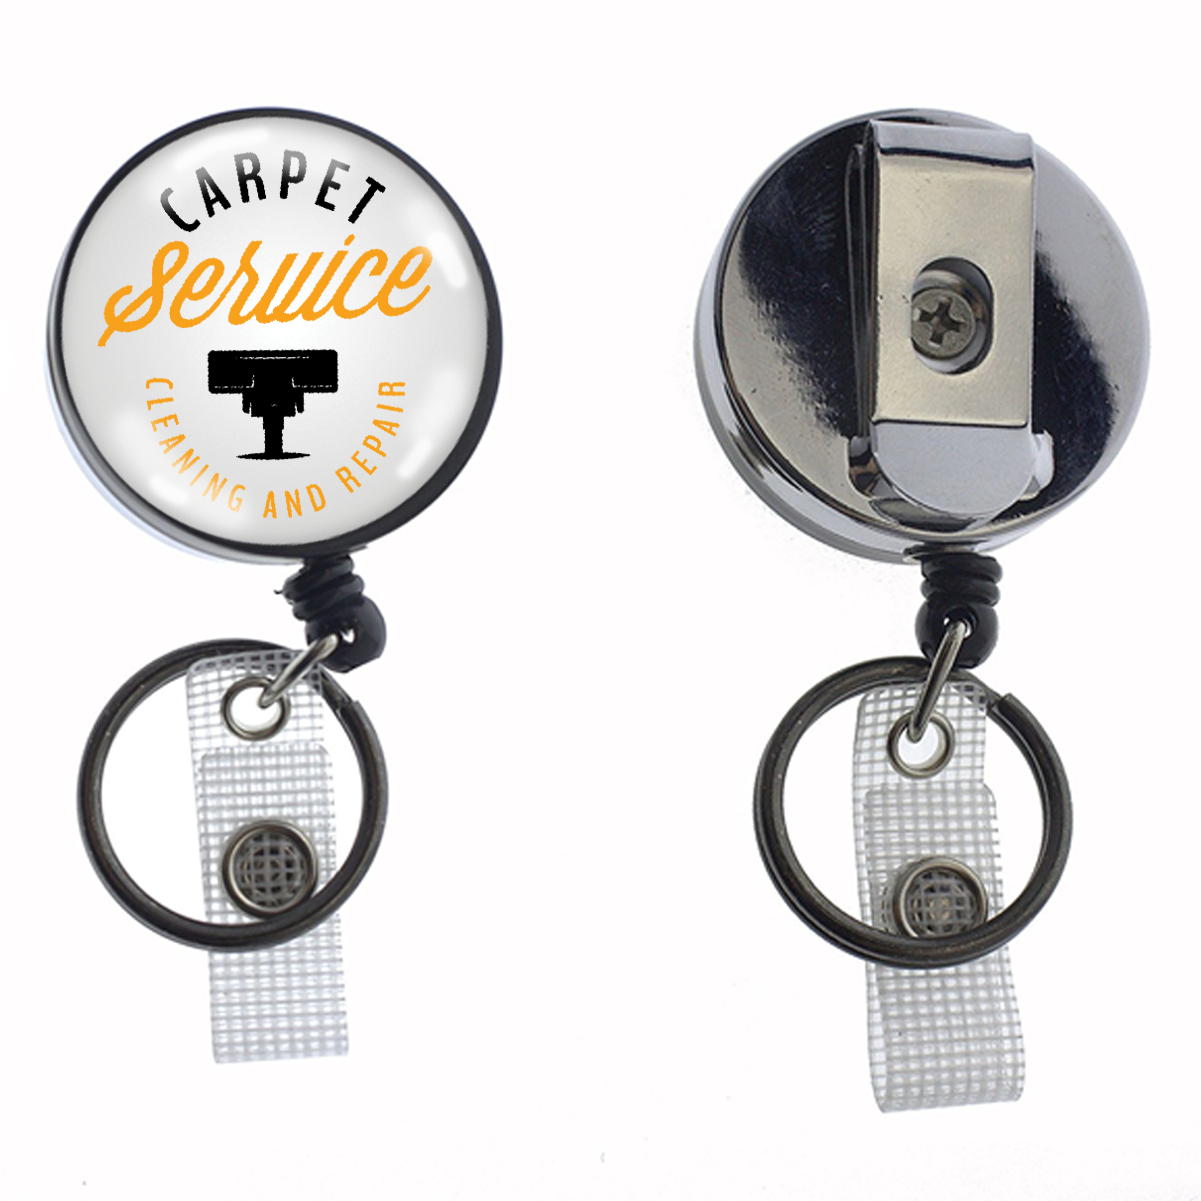 Two keychain retractable badge holders are shown. One features a logo for "Carpet Service Cleaning and Repair" with a vacuum image, while the other has a clip attached to the back for easy use. These Custom Heavy Duty Badge Reel with Key Ring and Badge Strap (SPID-3180) - Add Your Logo are perfect for personalized identification display on your key ring or badge strap.